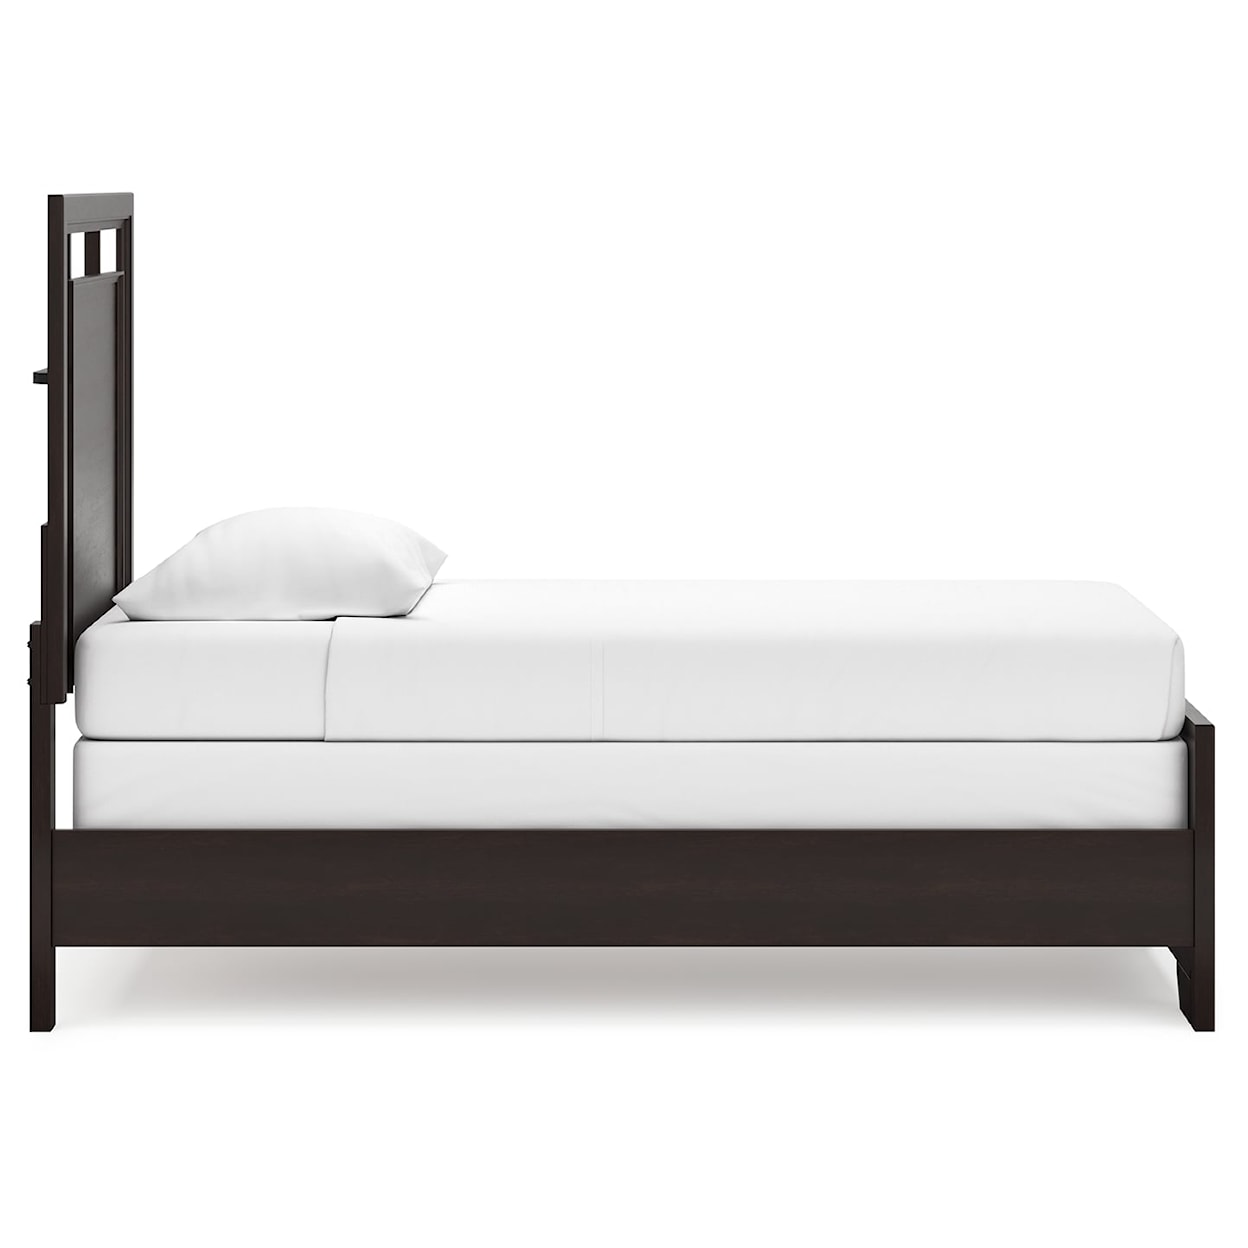 Signature Design Covetown Twin Panel Bed